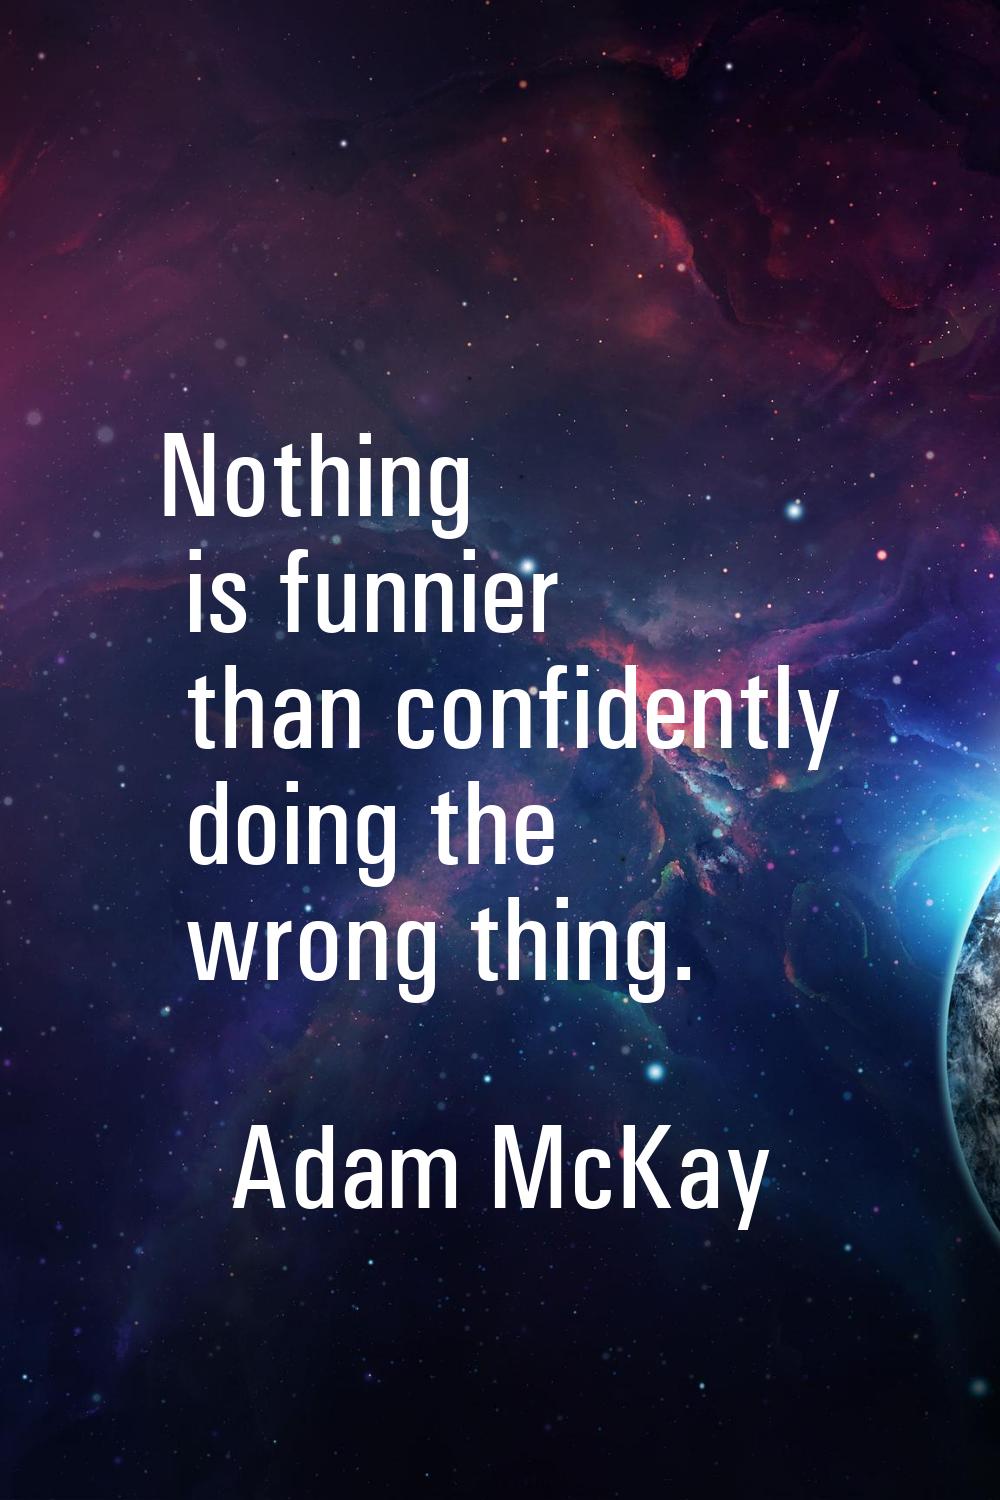 Nothing is funnier than confidently doing the wrong thing.